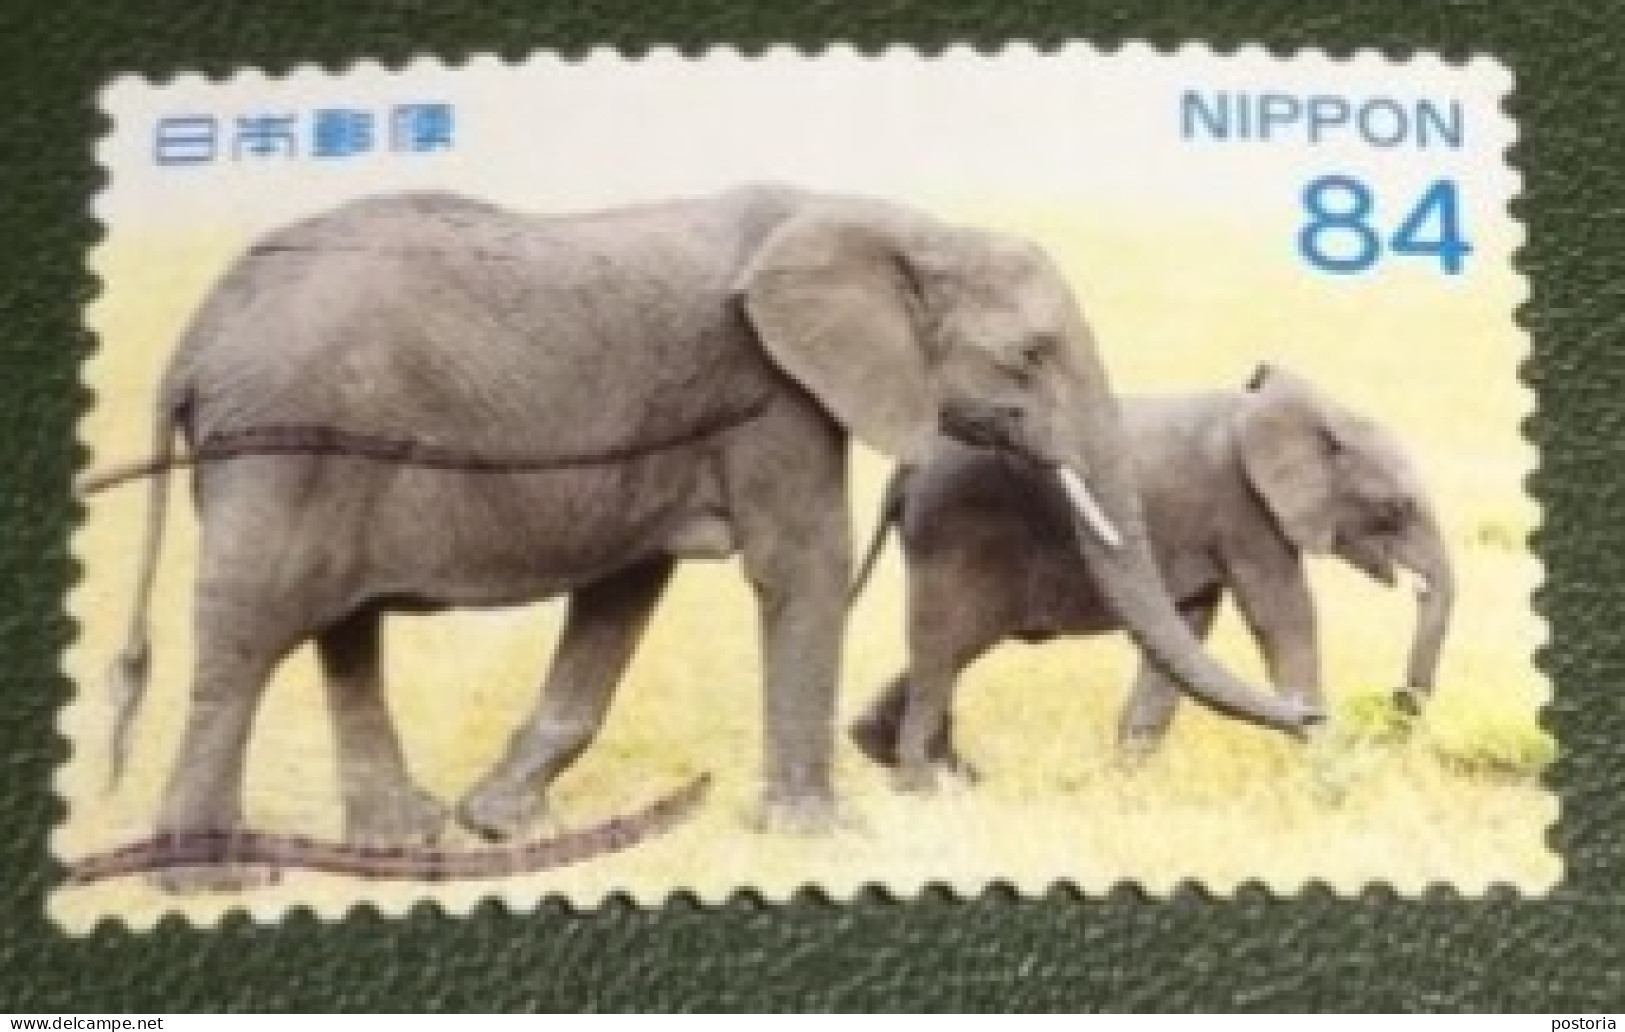 Nippon - Japan - 2020 - Michel 10605 - Old And Young Elephant - Olifant - Gebraucht